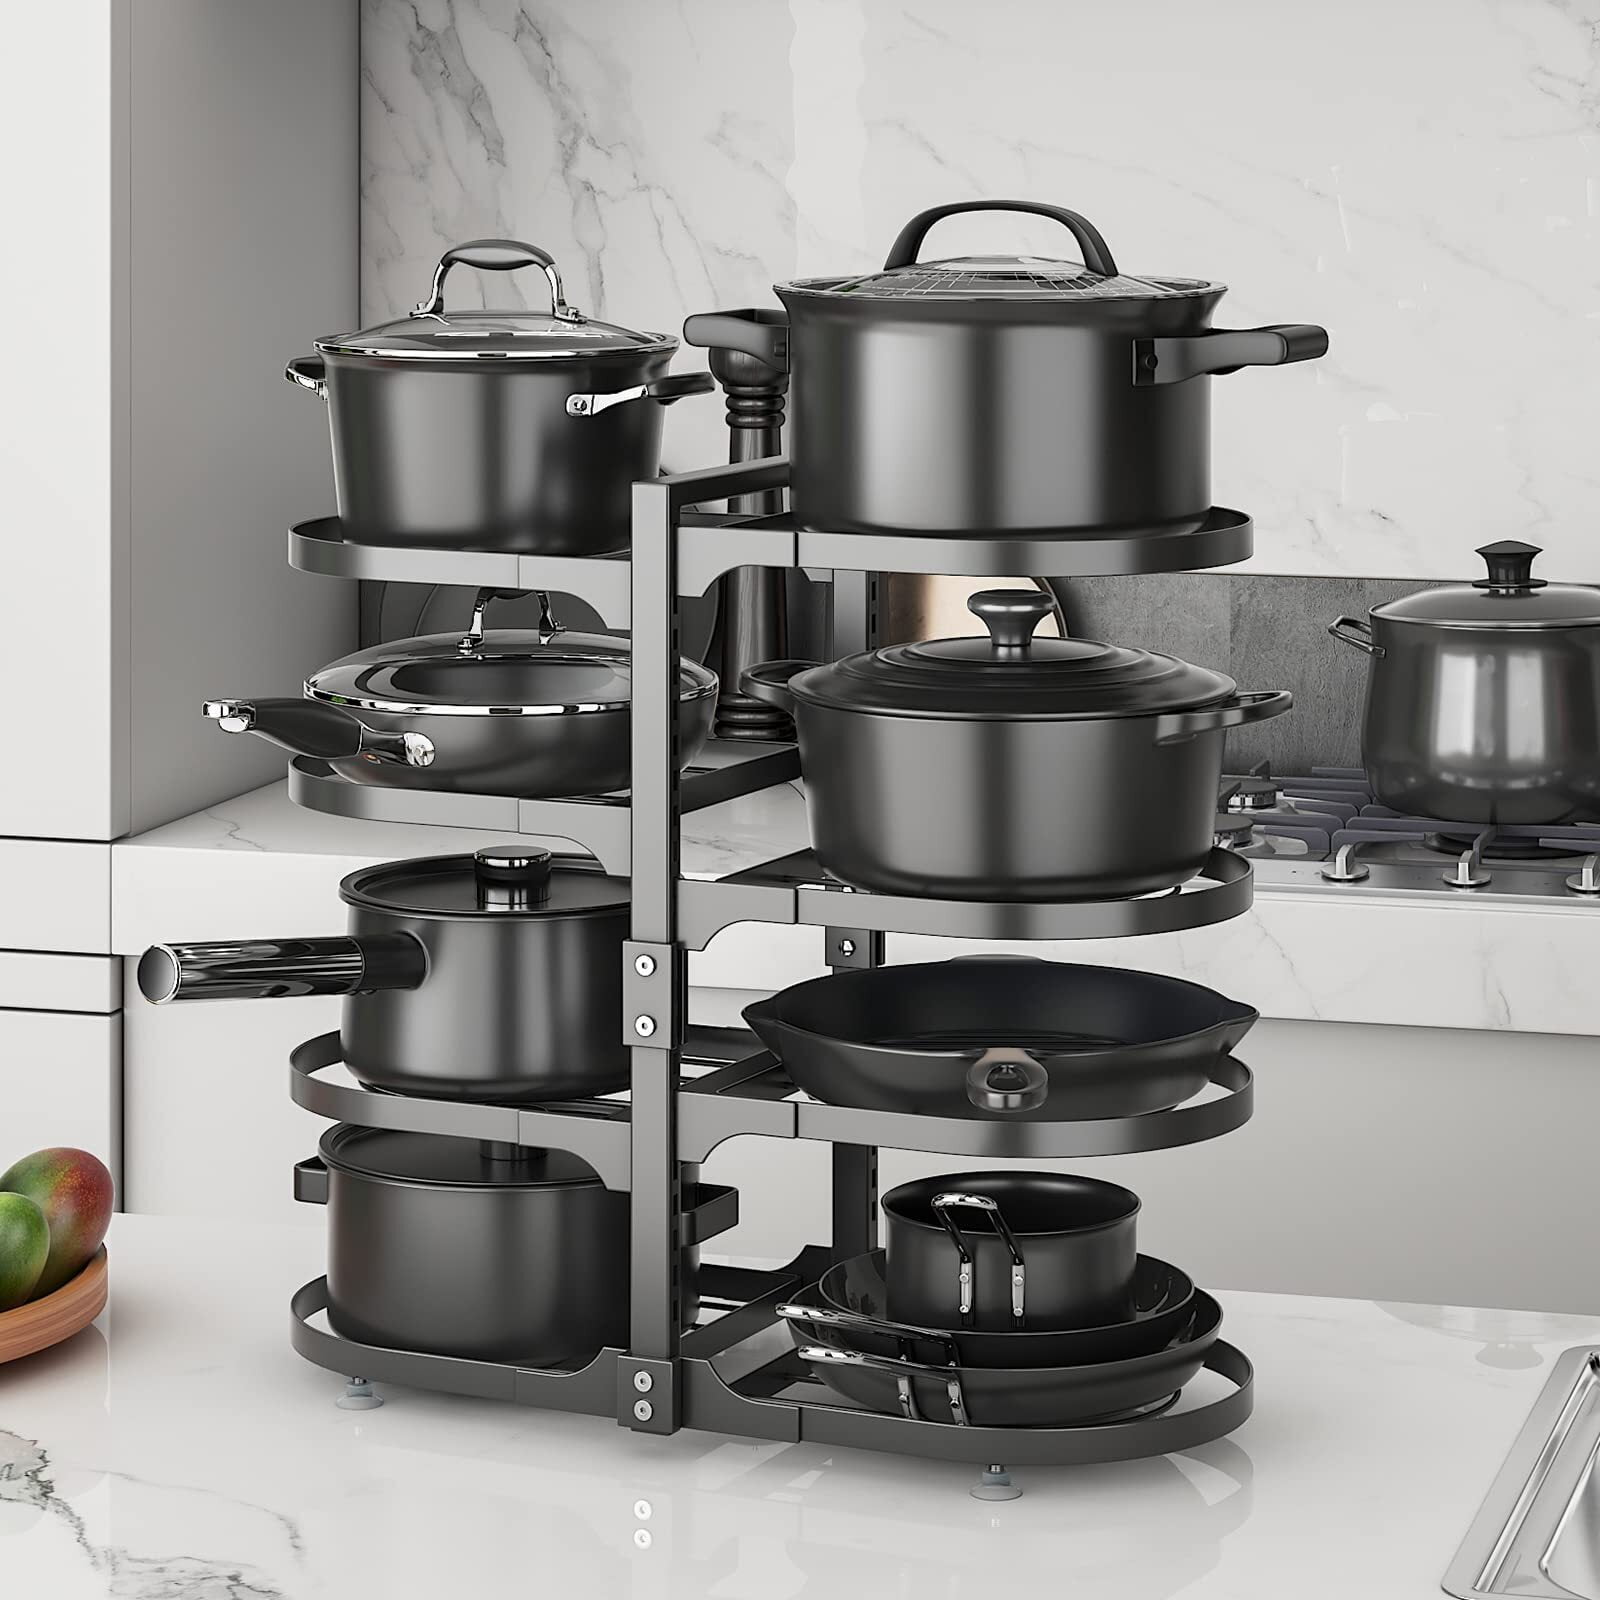  G-TING Pot Rack Organizers, 8 Tiers Pots and Pans Organizer for  Kitchen Organization & Storage, Adjustable Pot Lid Holders & Pan Rack for  Kitchen, Lid Organizer for Pots and Pans With